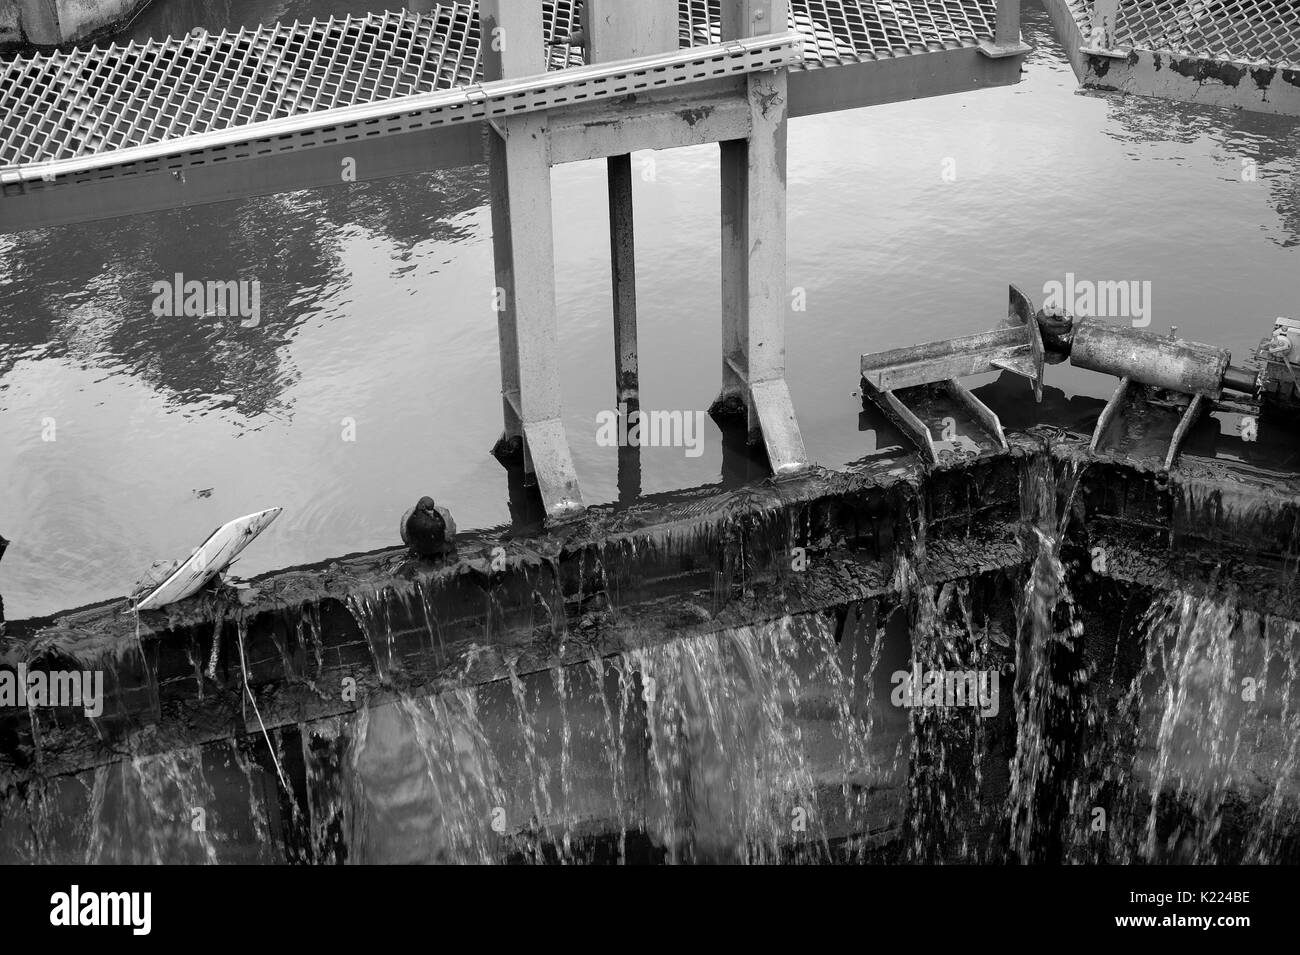 Pigeon sitting on weir, Canal de Midi, Toulouse, France Stock Photo